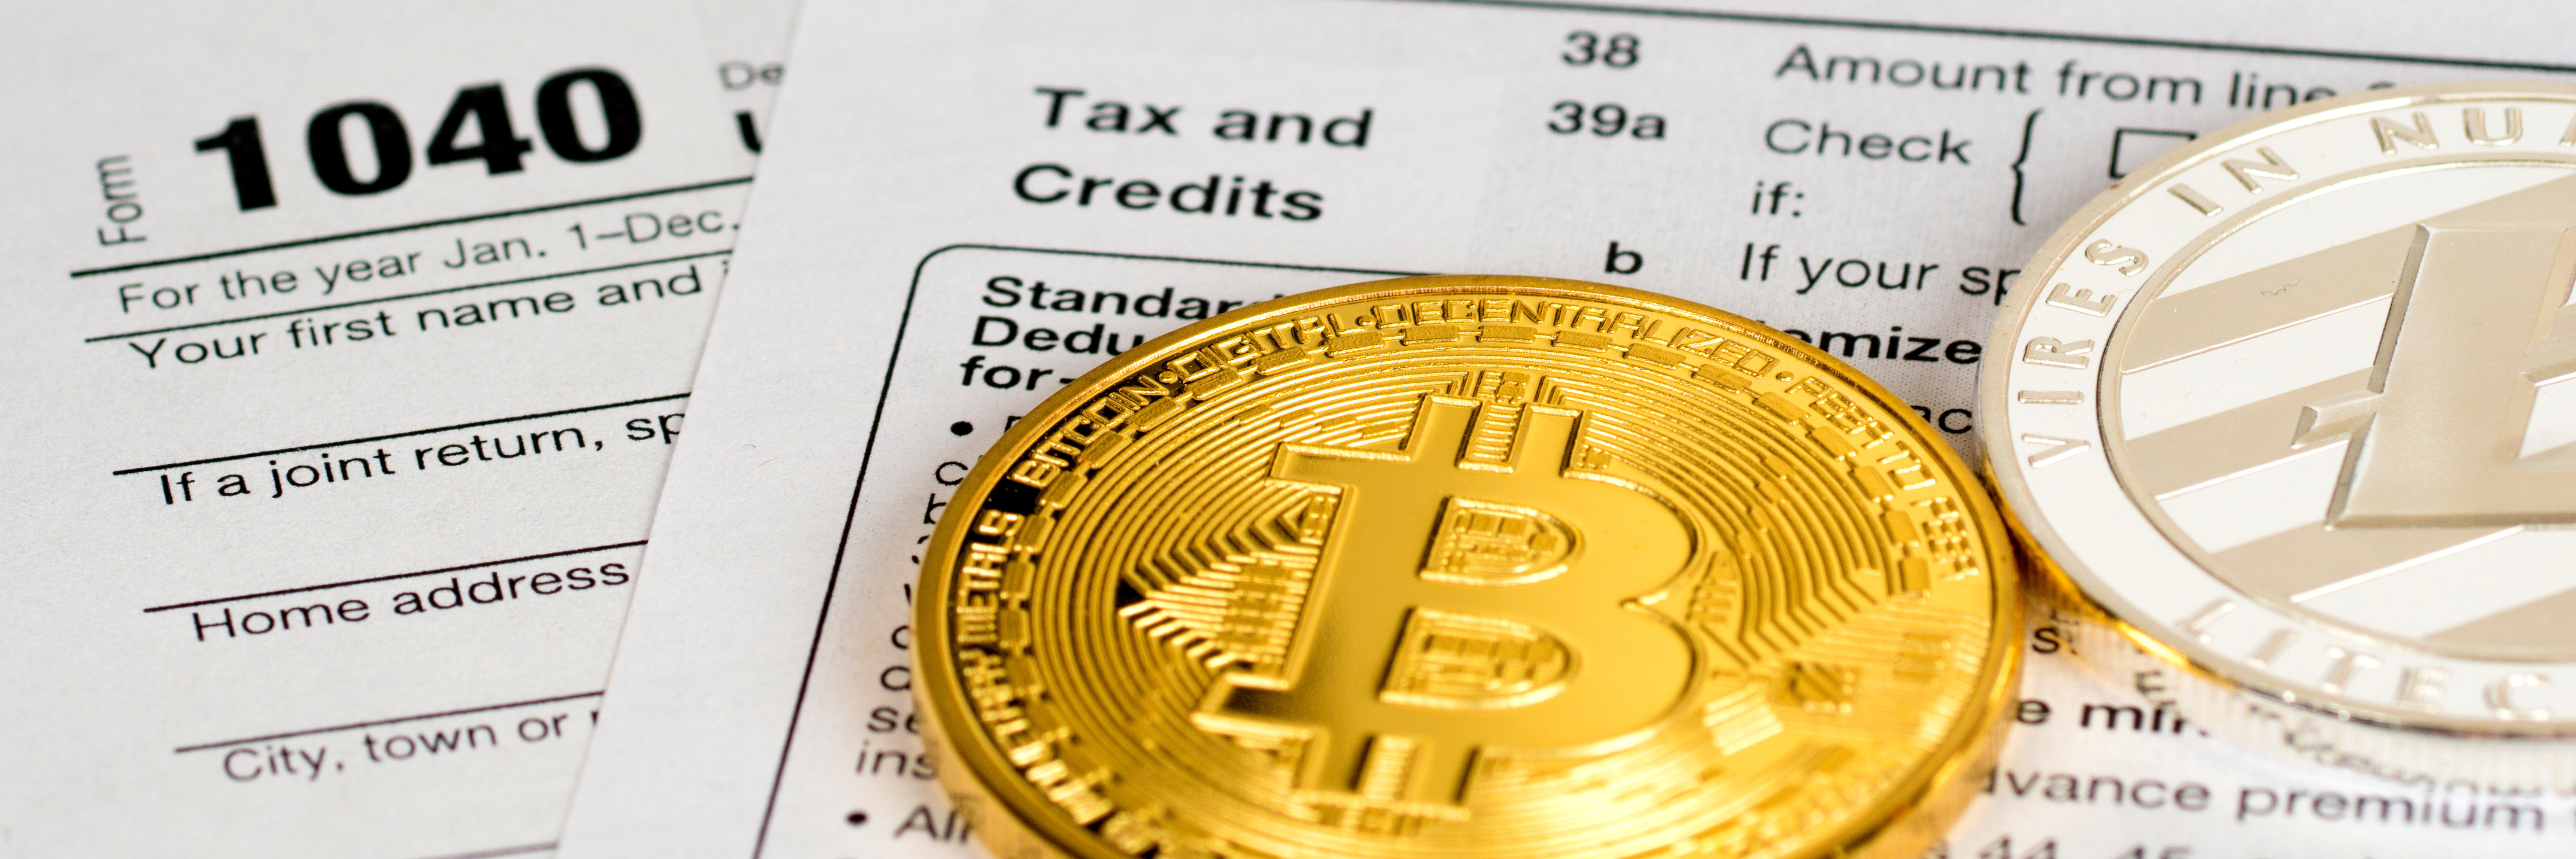 Crypto Question Placement on New Tax Return 'Signals IRS Action'